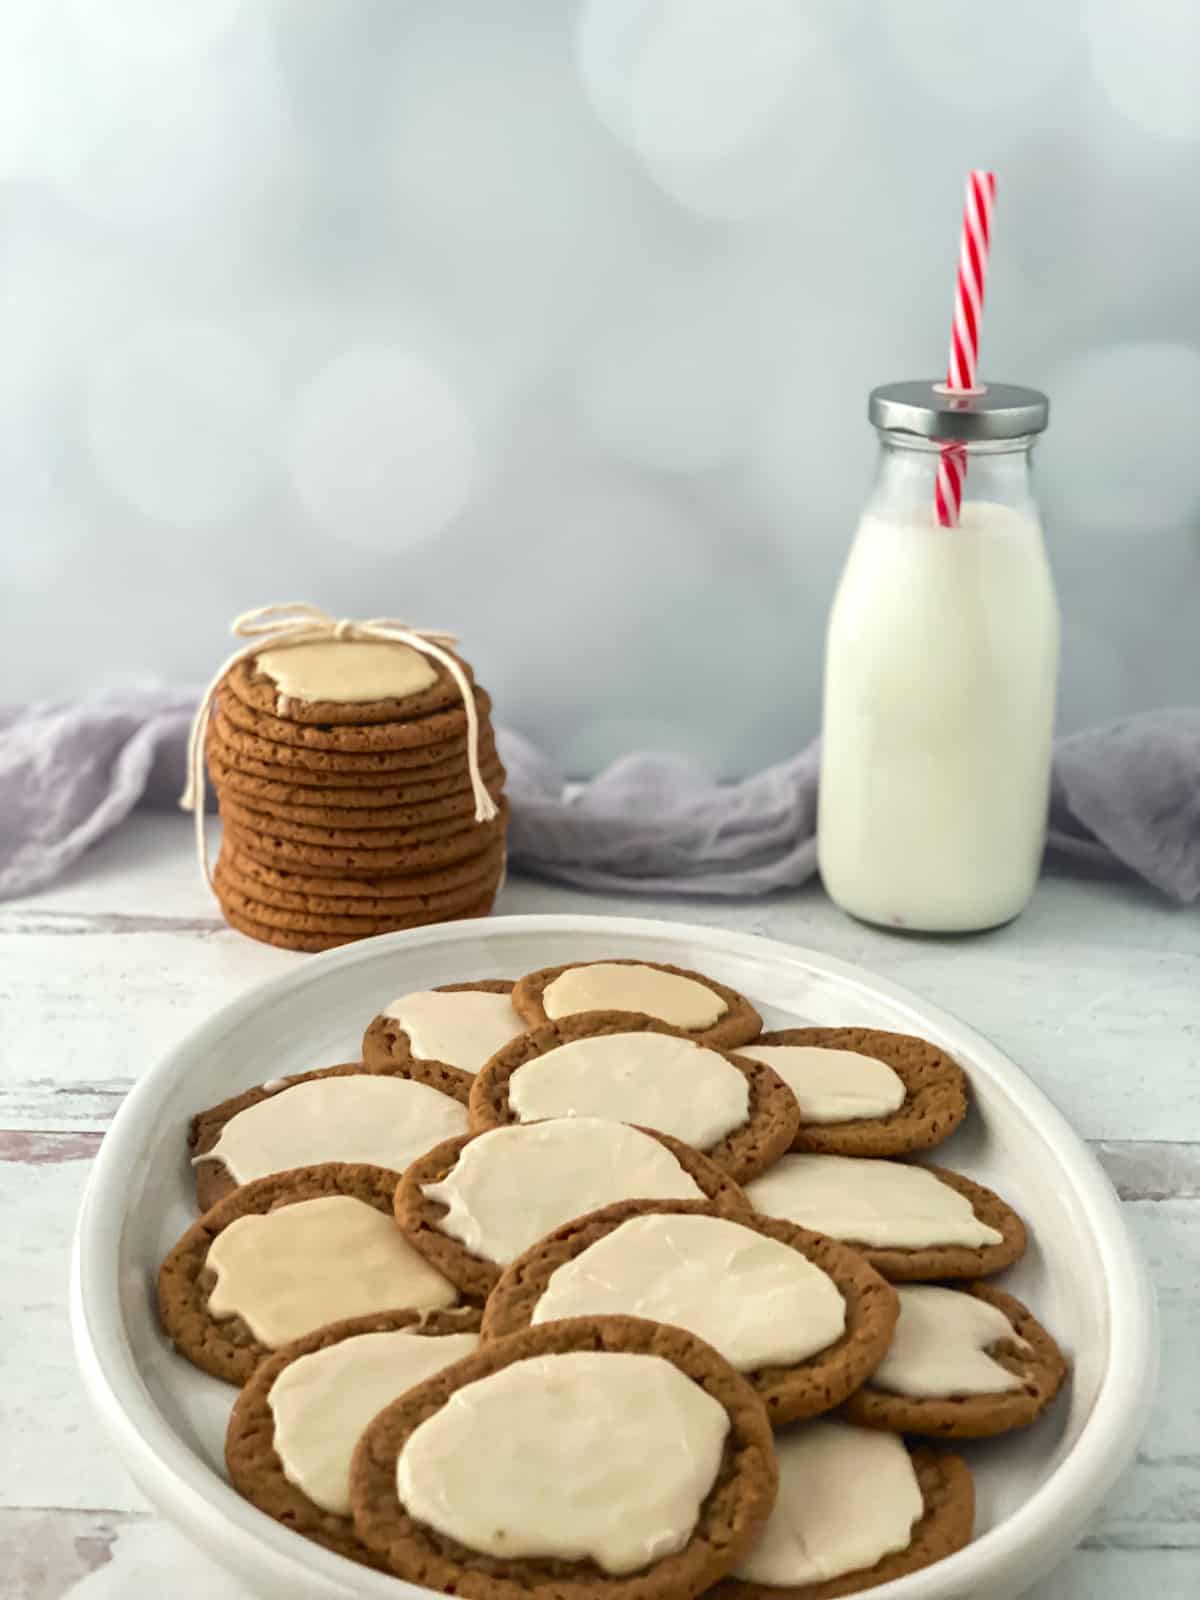 Cookies with icing on a white plate on a white counter with a bottle of milk with a straw.